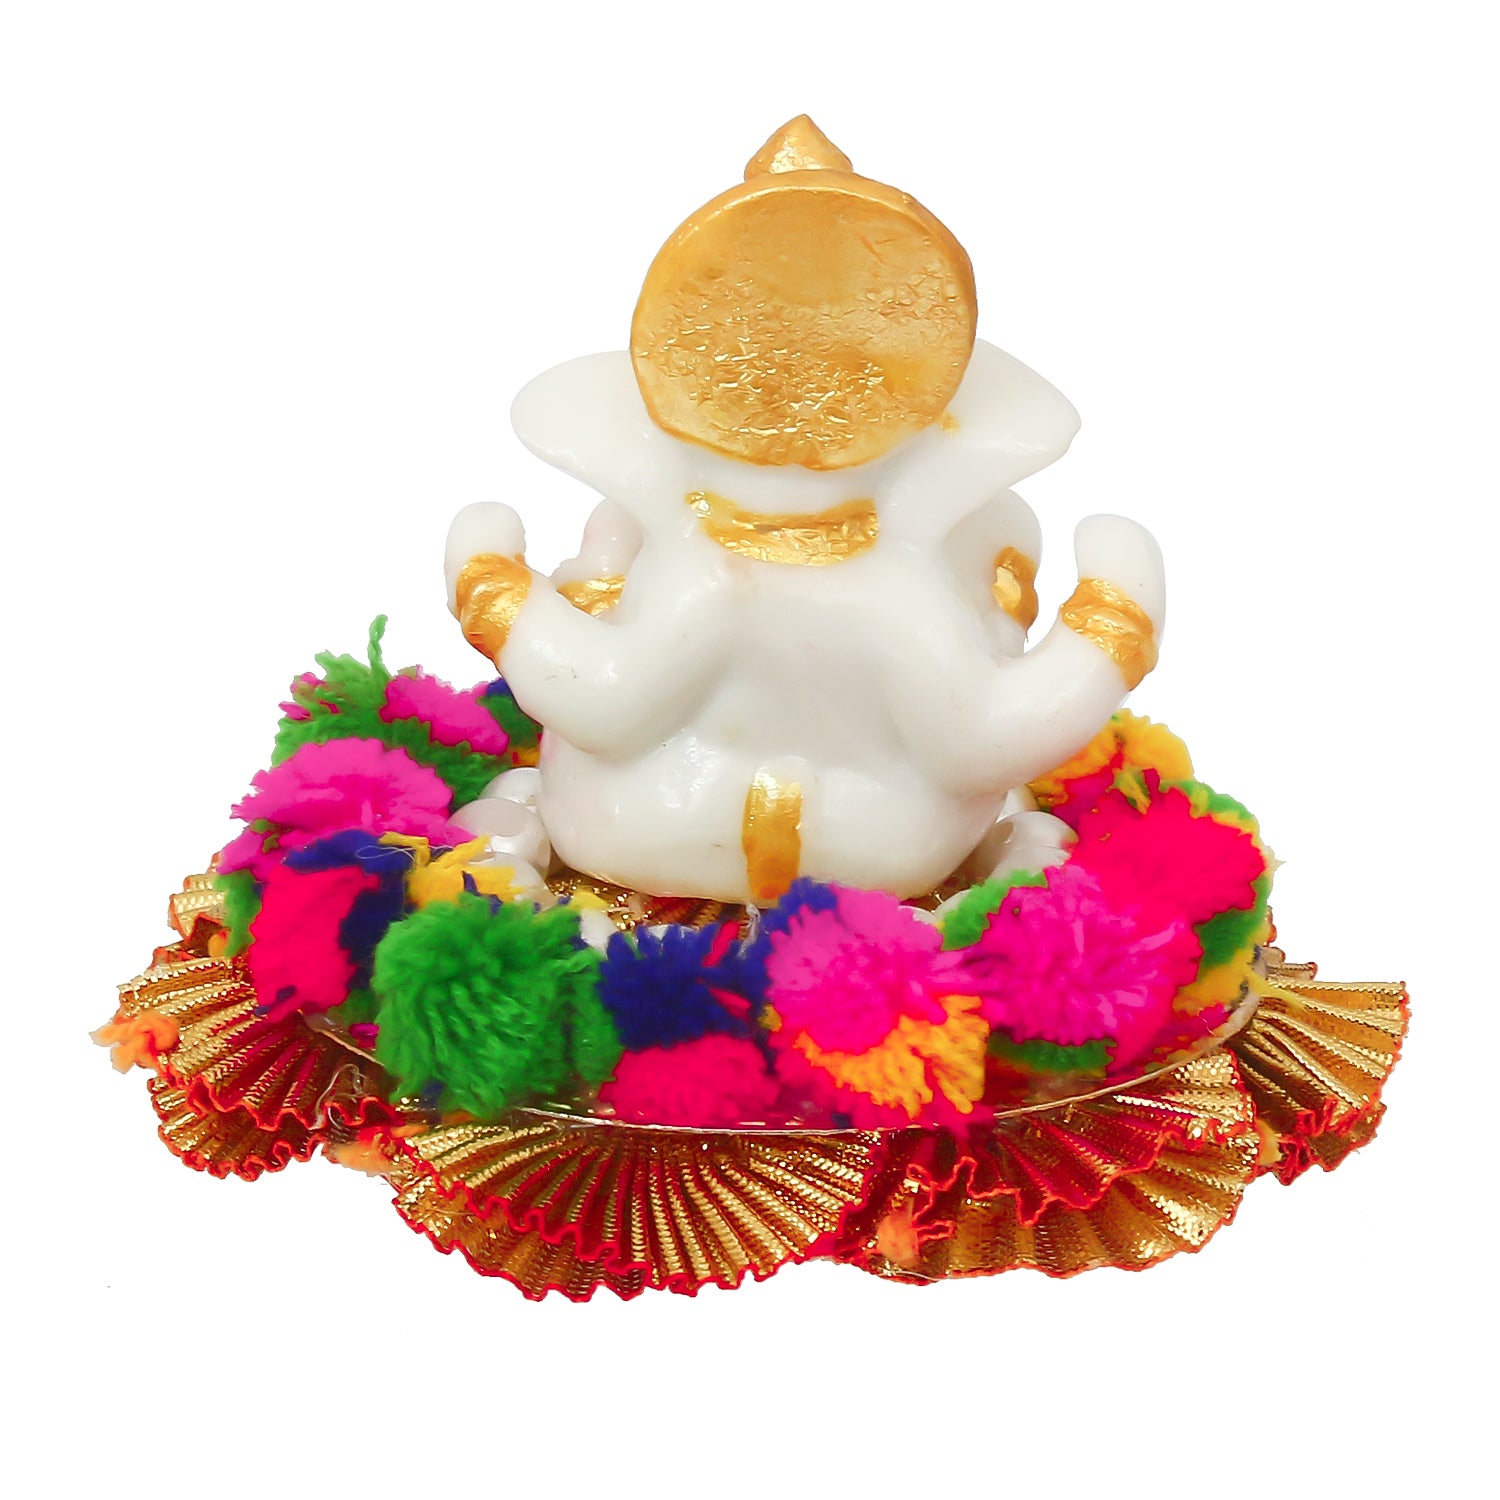 Lord Ganesha Idol On Decorative Handicrafted Plate For Home And Car Dashboard 5